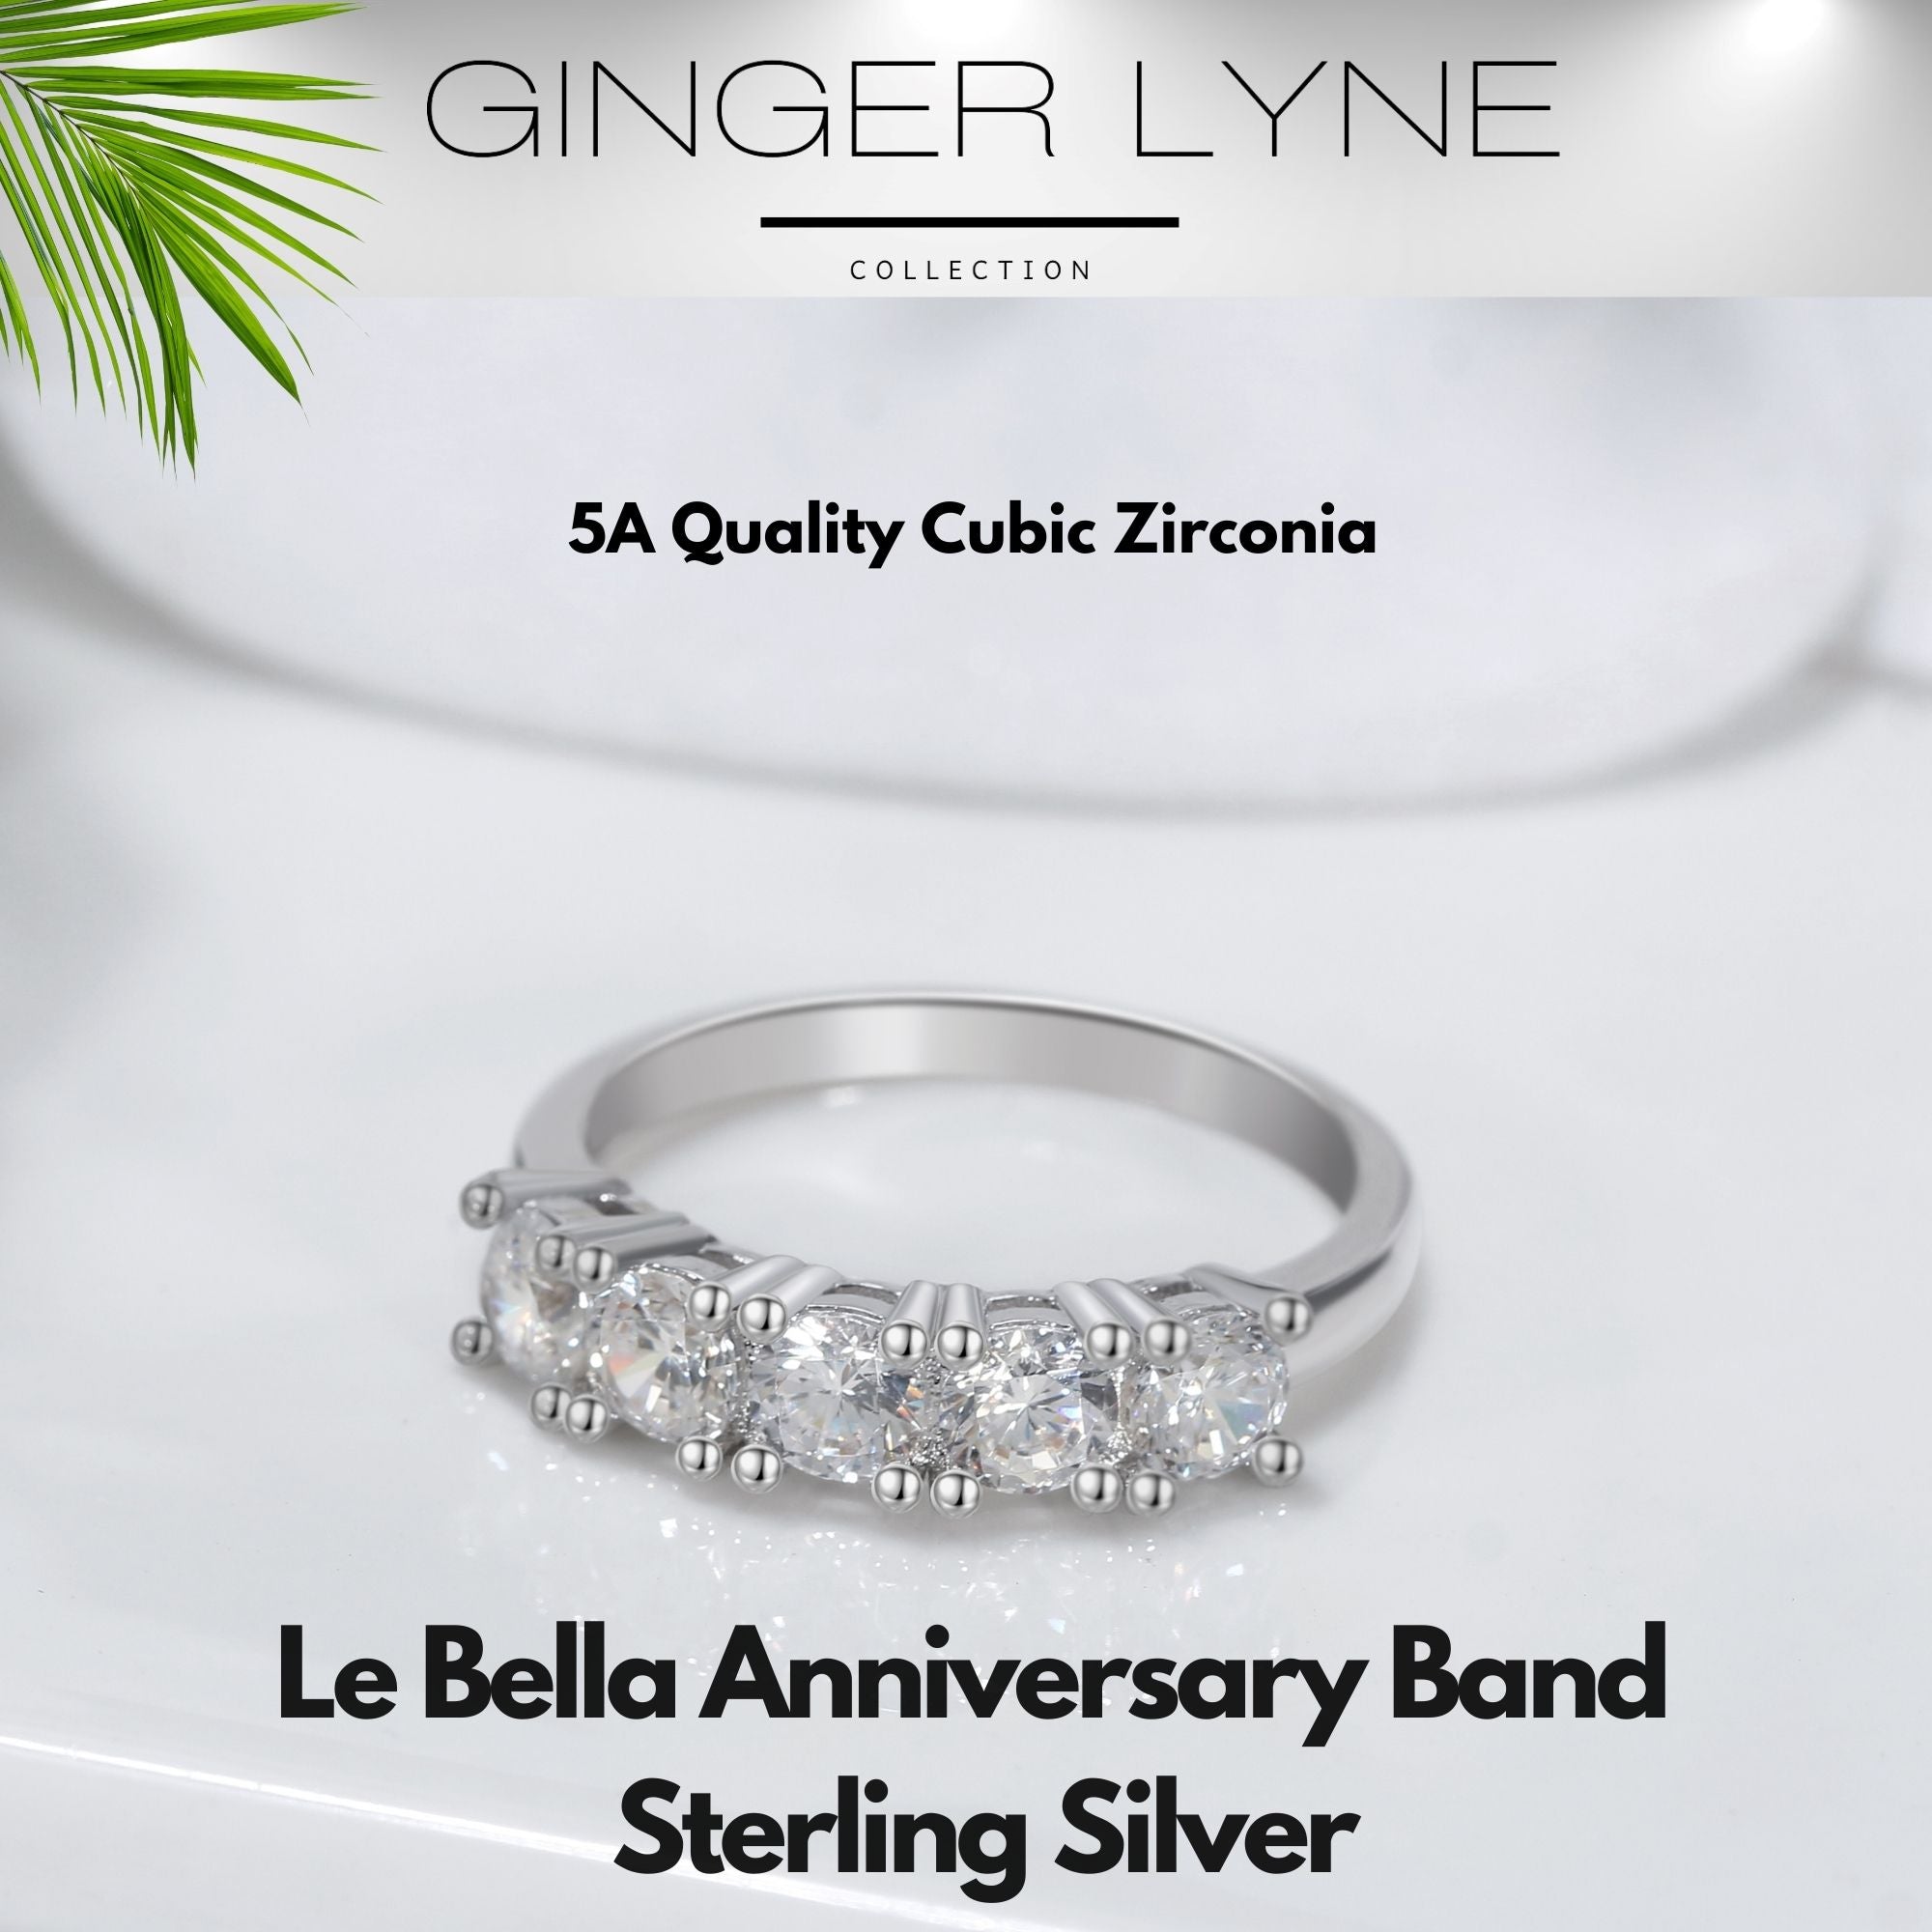 Le Bella Anniversary Ring for Women Wedding Band Ring Cz Sterling Silver by Ginger Lyne - 10